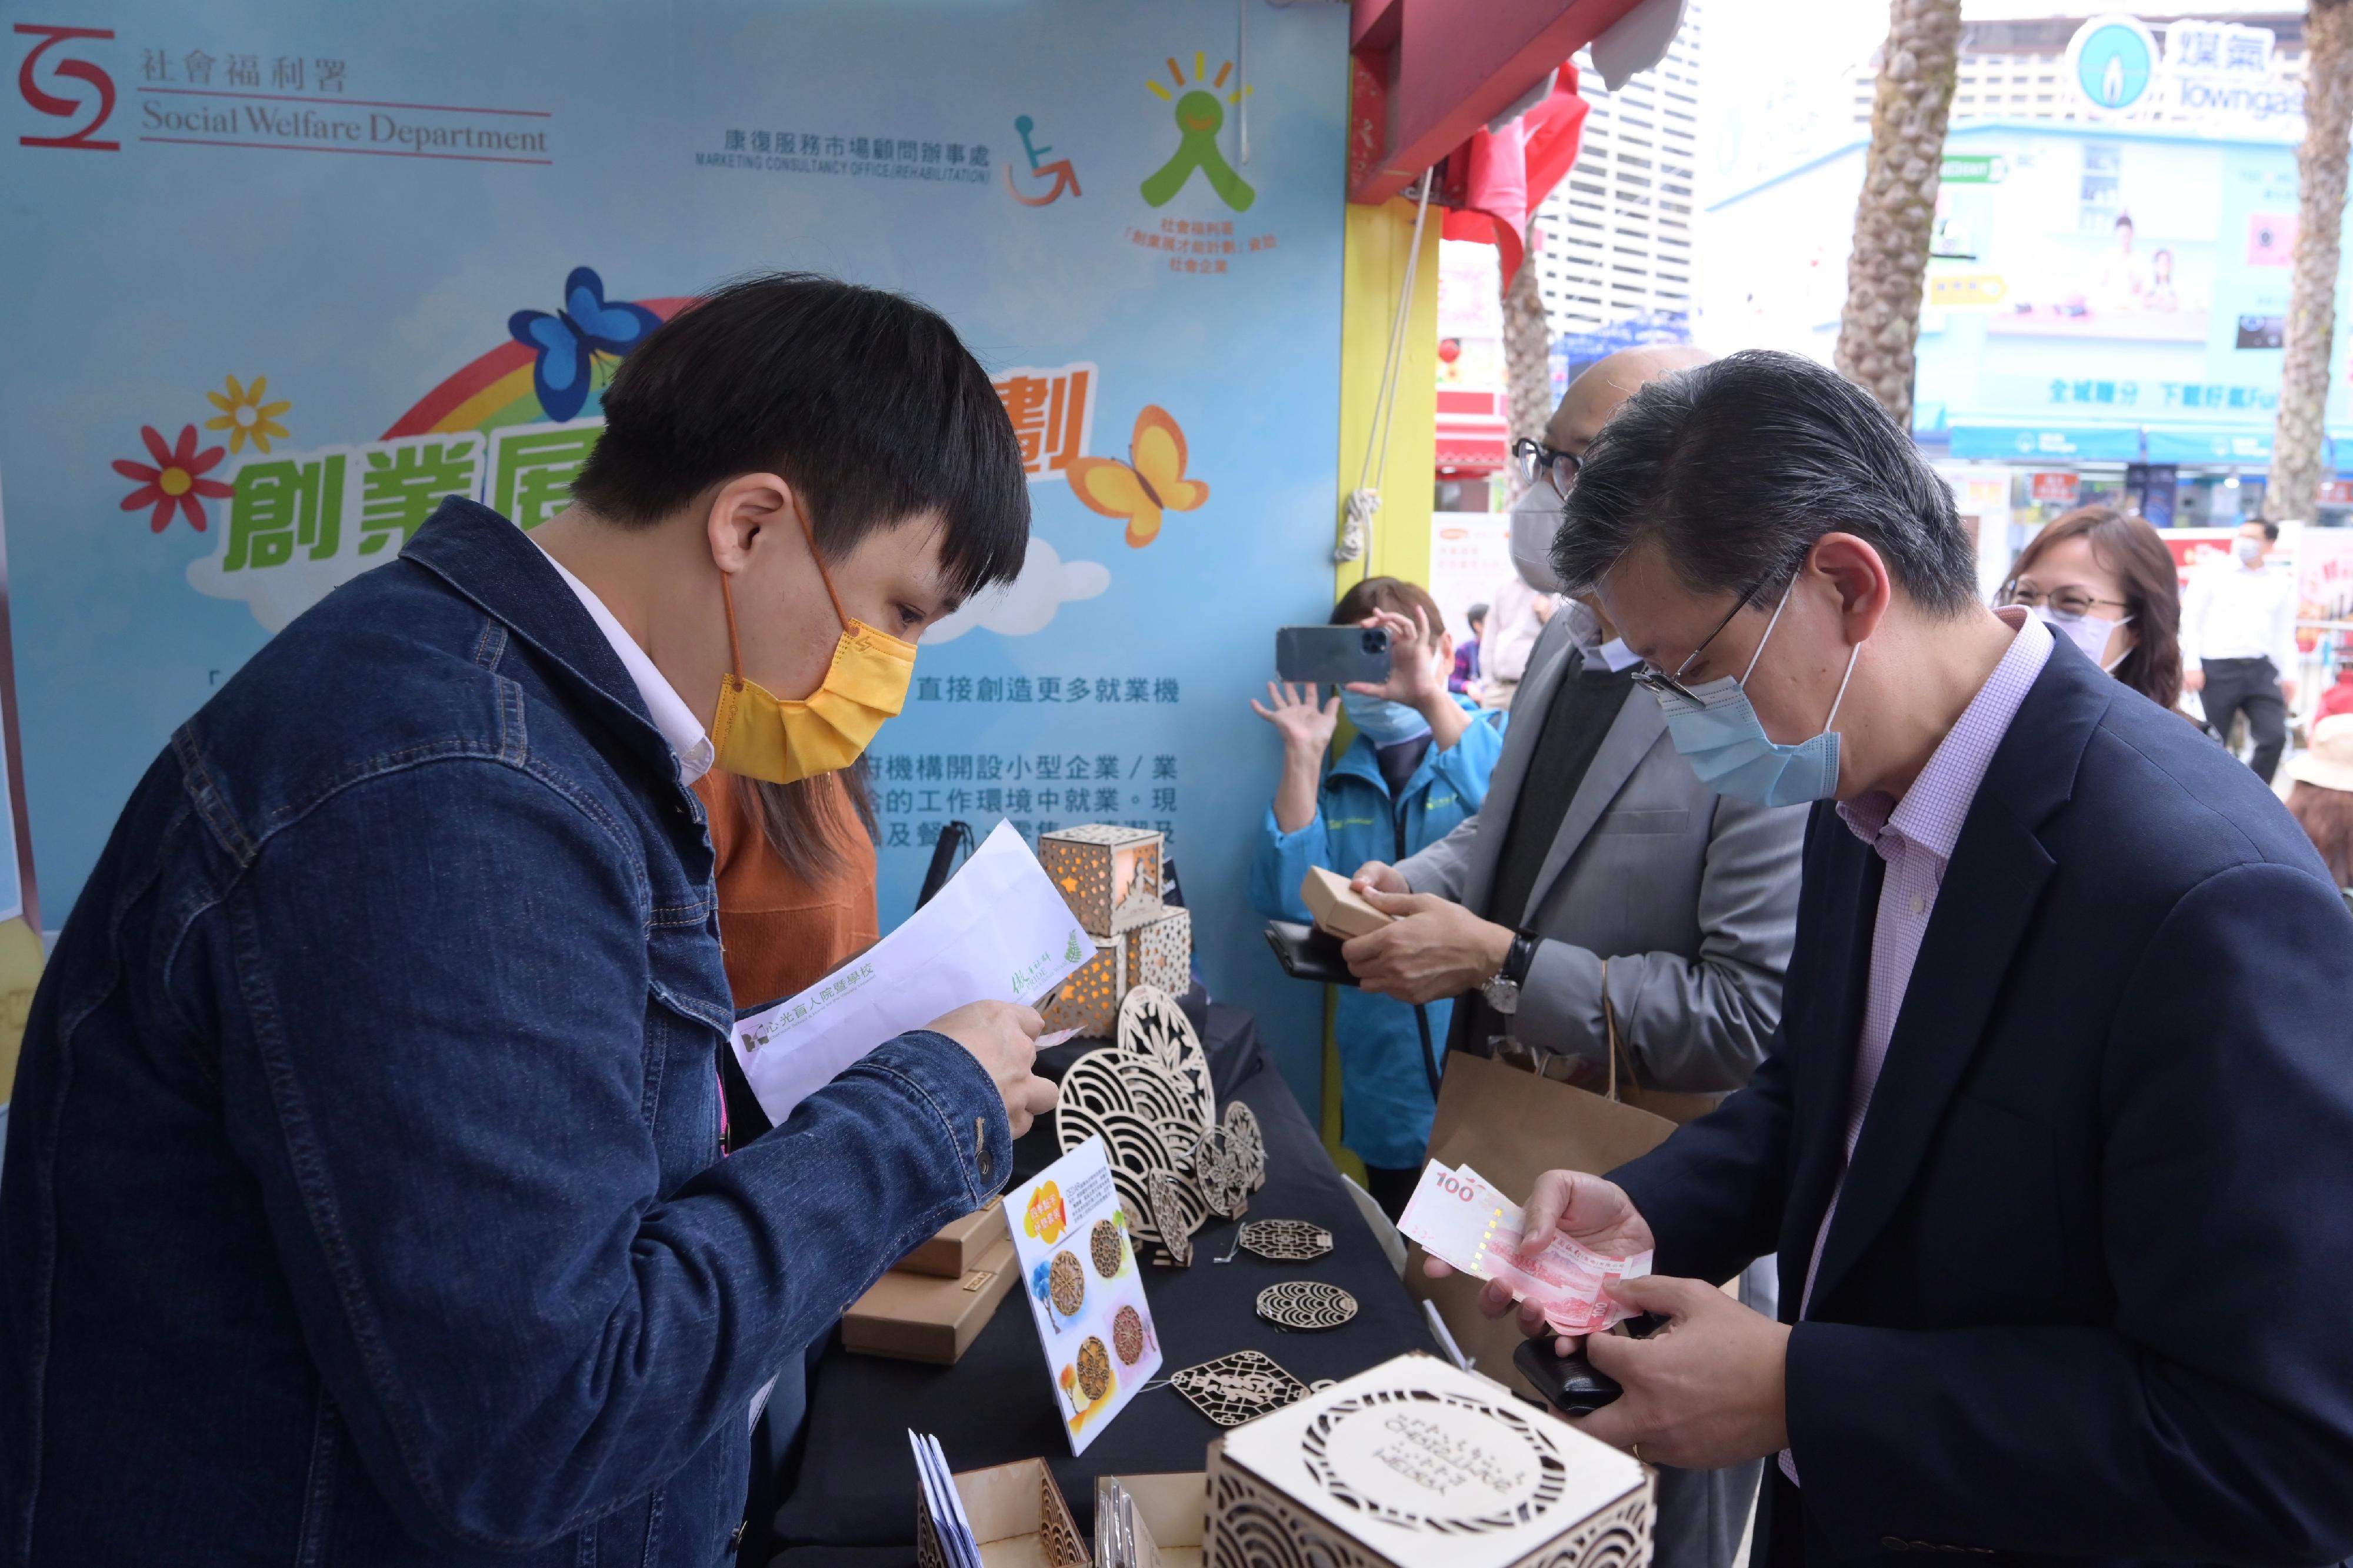 The Director of Social Welfare, Mr Gordon Leung, and the Chairperson of the Advisory Committee on Enhancing Employment of People with Disabilities, Dr Kevin Lau, visited the 55th Hong Kong Brands and Products Expo at Victoria Park today (December 22). Photo shows Mr Leung (first right) shopping at a booth set up by a rehabilitation service unit.